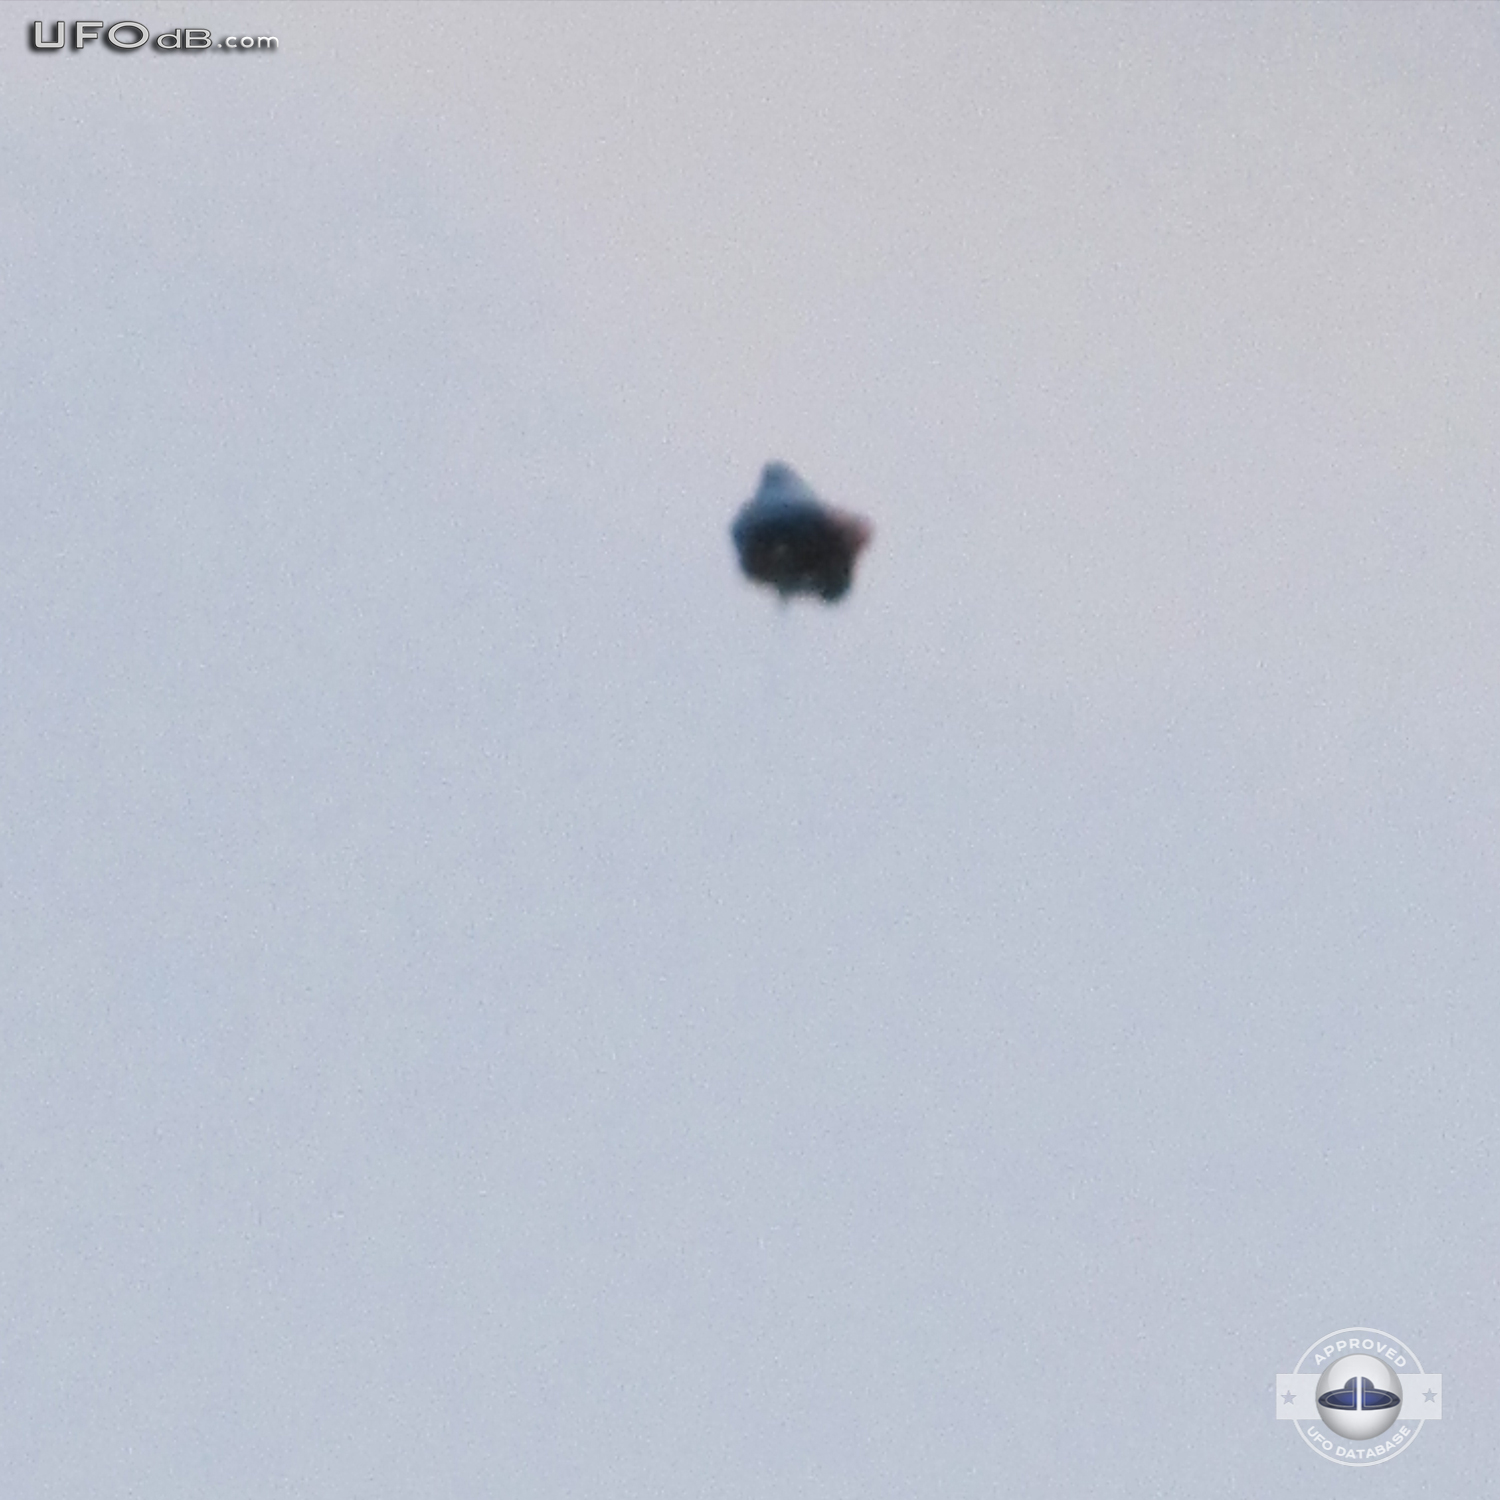 A Massachusetts citizen get a picture of UFO the size of a Basketball UFO Picture #365-1